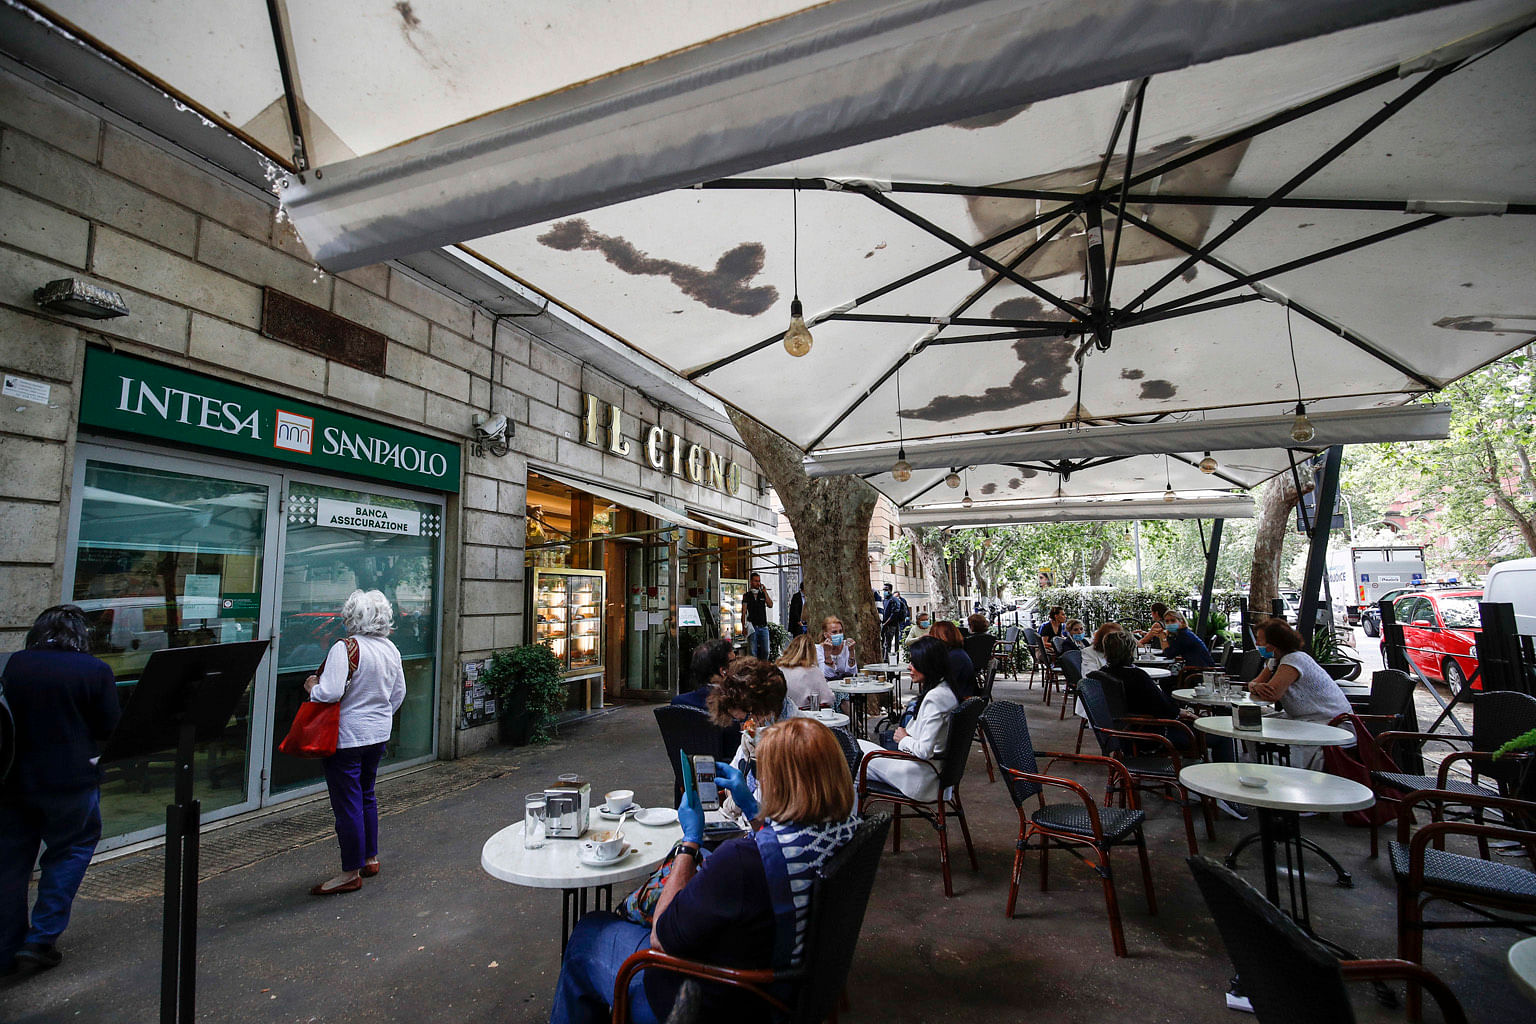 Malaysians shopping in Kuala Lumpur yesterday. Malaysia eased controls on May 4, allowing most businesses to reopen. But large gatherings are still banned. PHOTO: REUTERS Italians having coffee on the terrace of an eatery in Rome yesterday. Italy's b